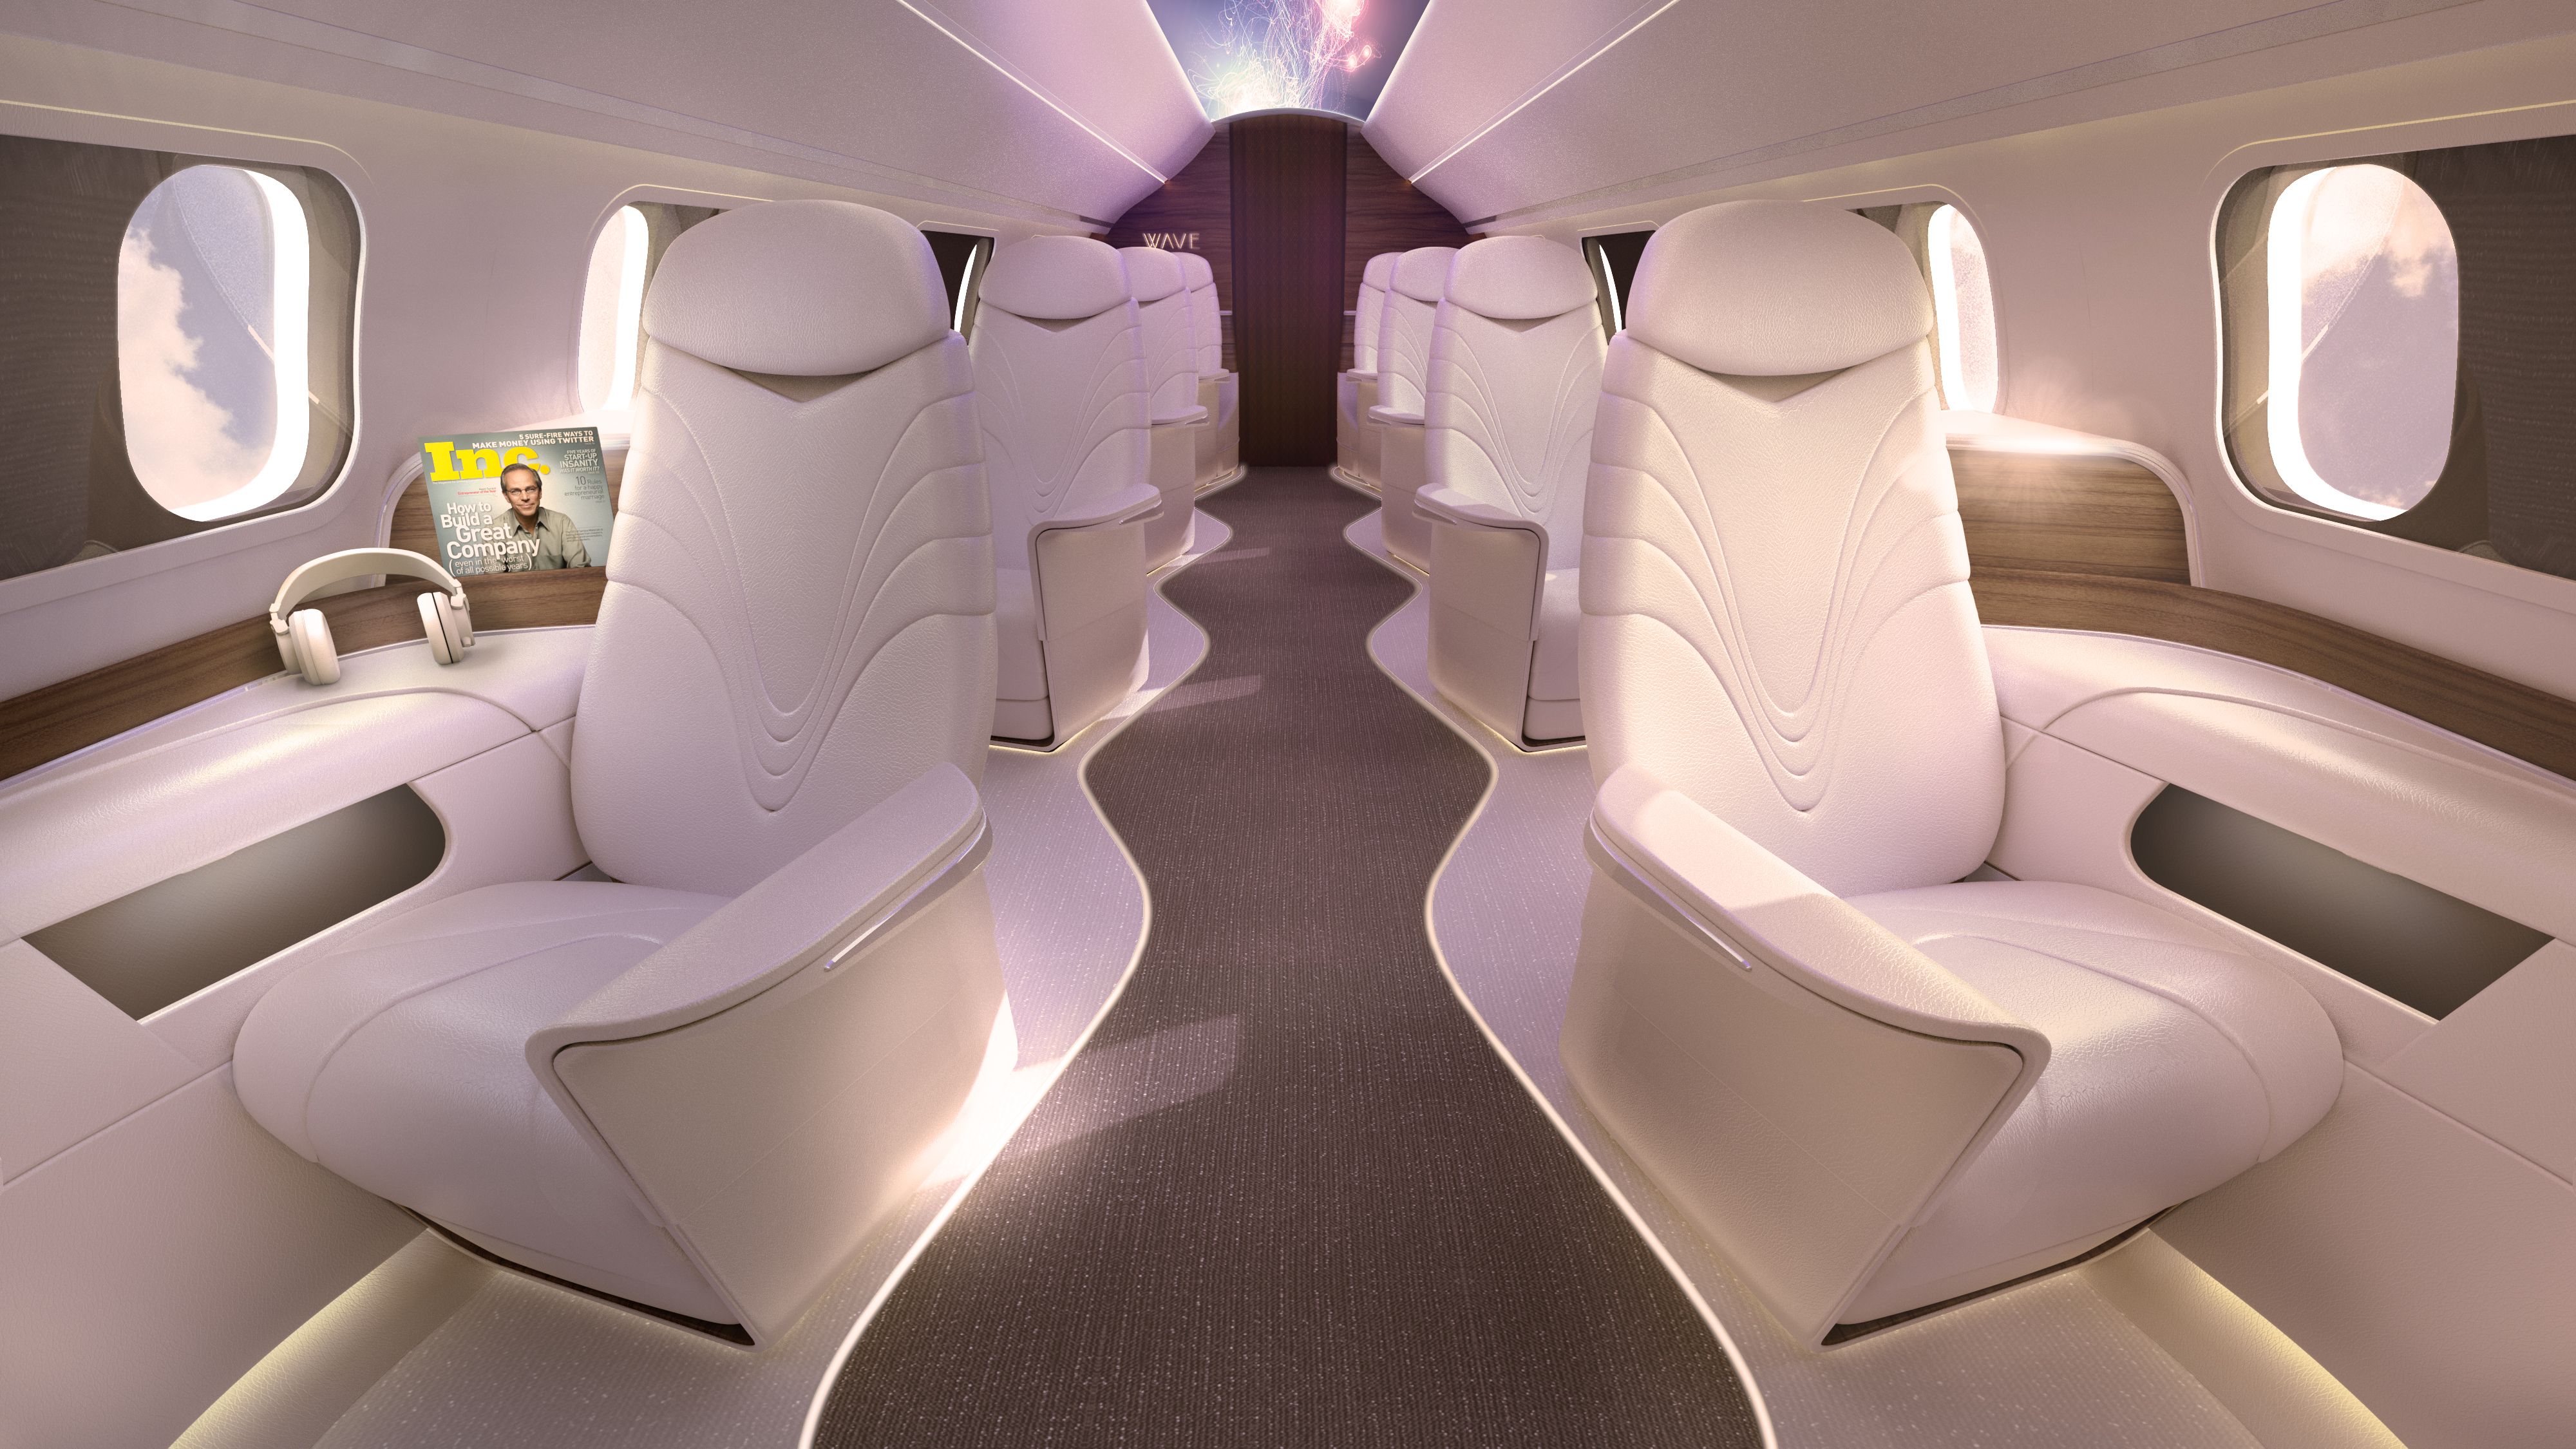 ZED Aerospace is launching AURA, America’s first Five Star flight experience, combining the luxury and convenience of a private jet with the affordability and reliability of commercial air travel.